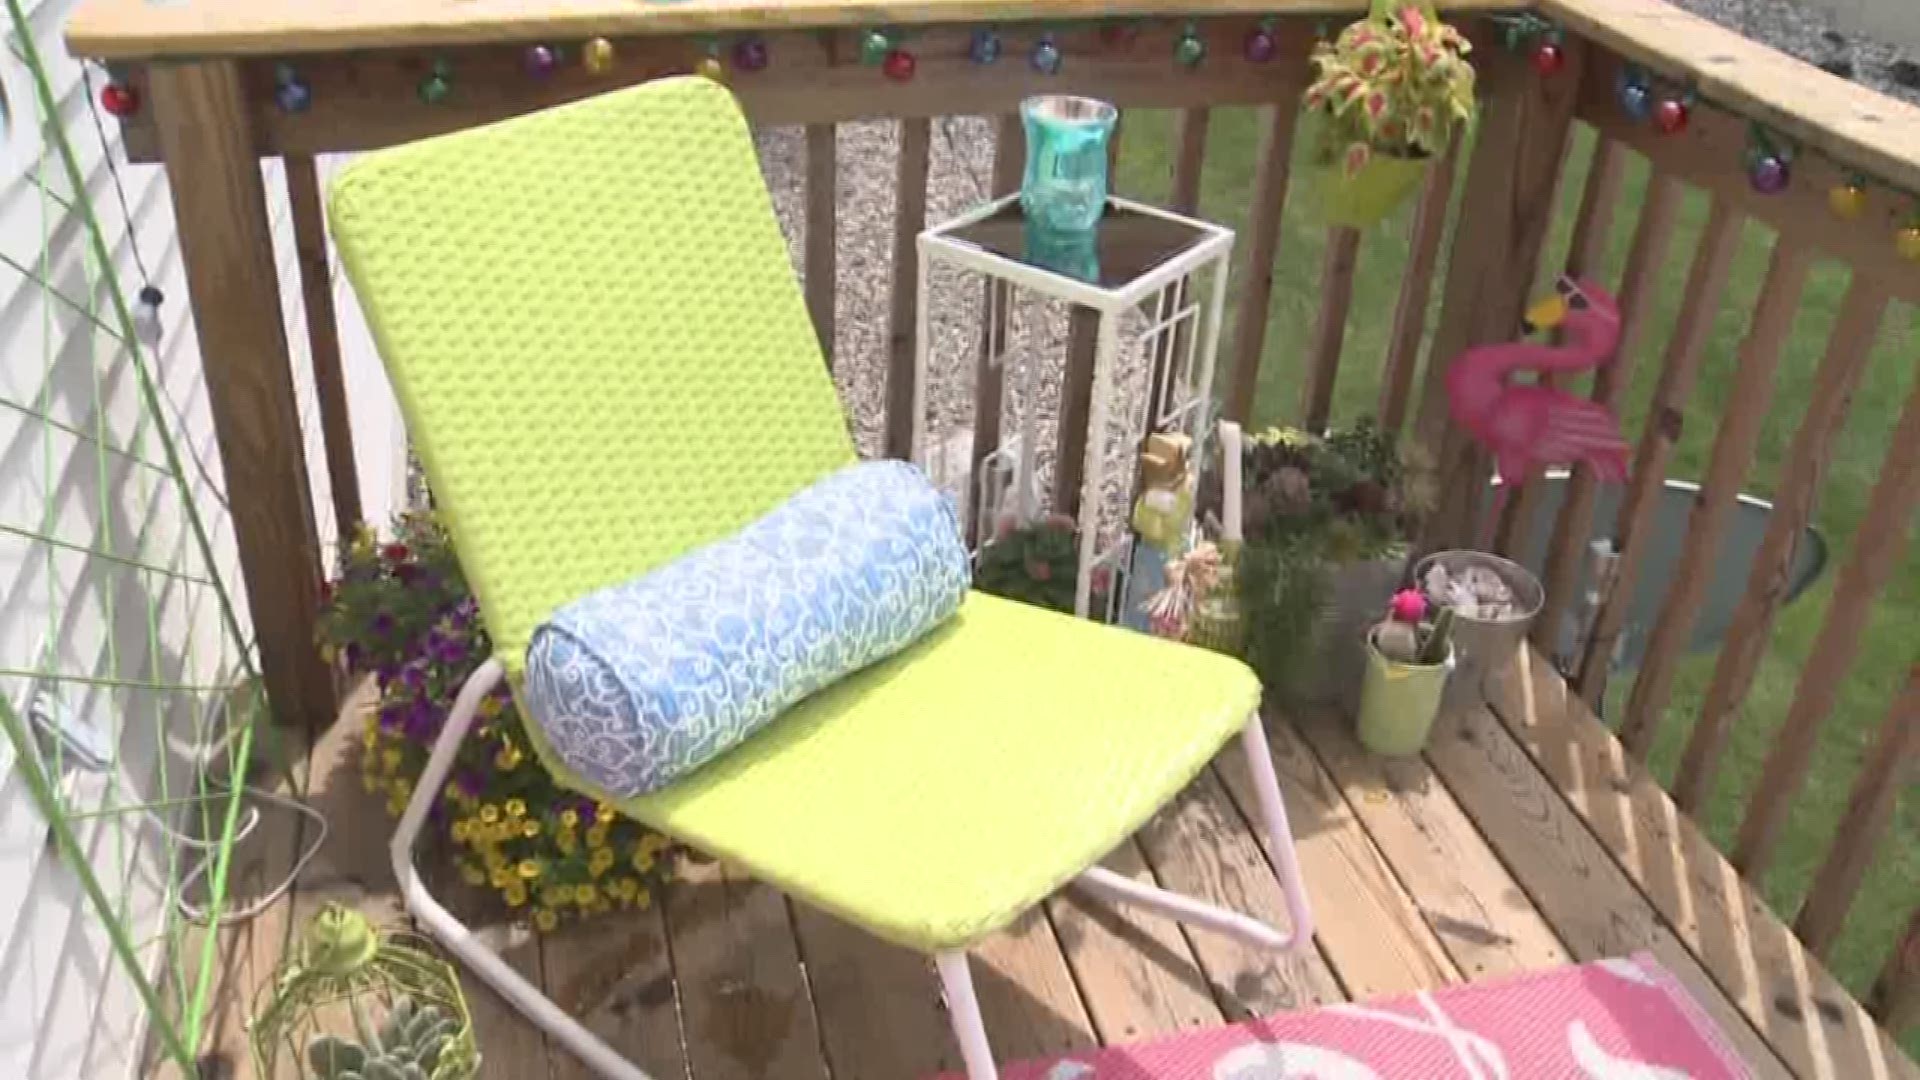 Makeover Monday: Spruce up the patio